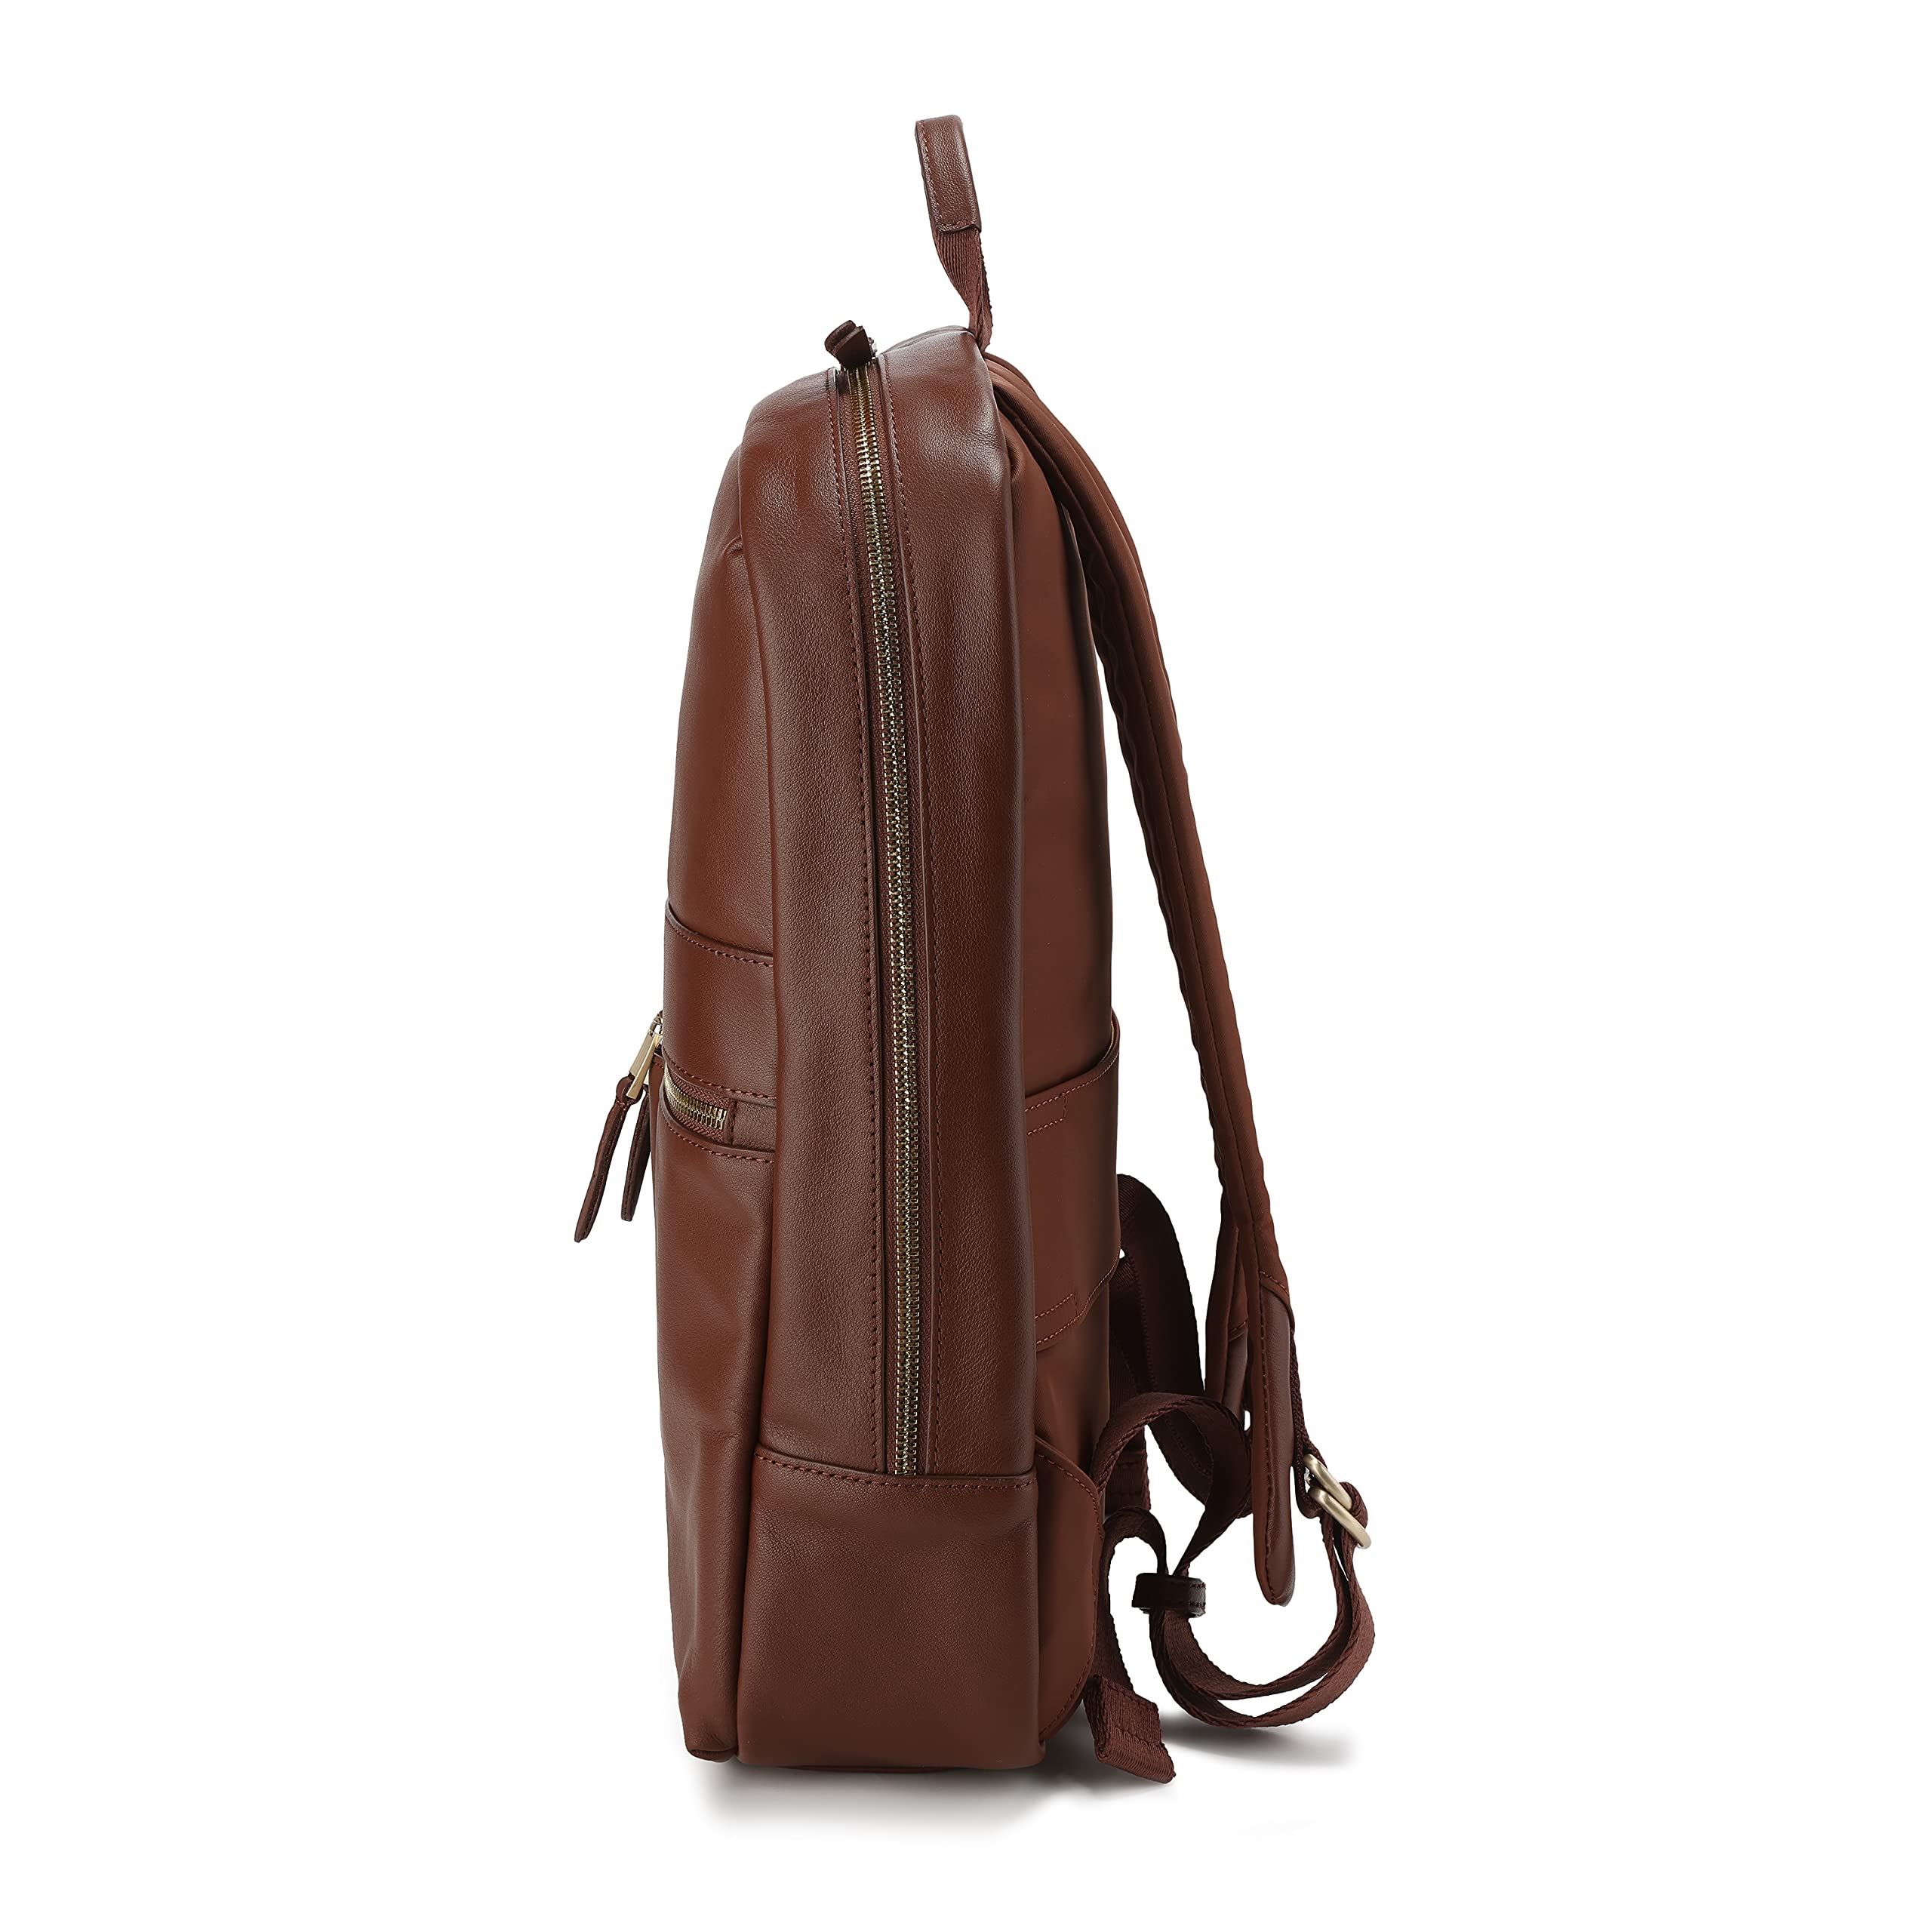 KNOMO Leather Beauchamp 14quot; Laptop Backpack Slim Computer Bookbag for Work, Schoo, Travel Purse Daypack, Brown